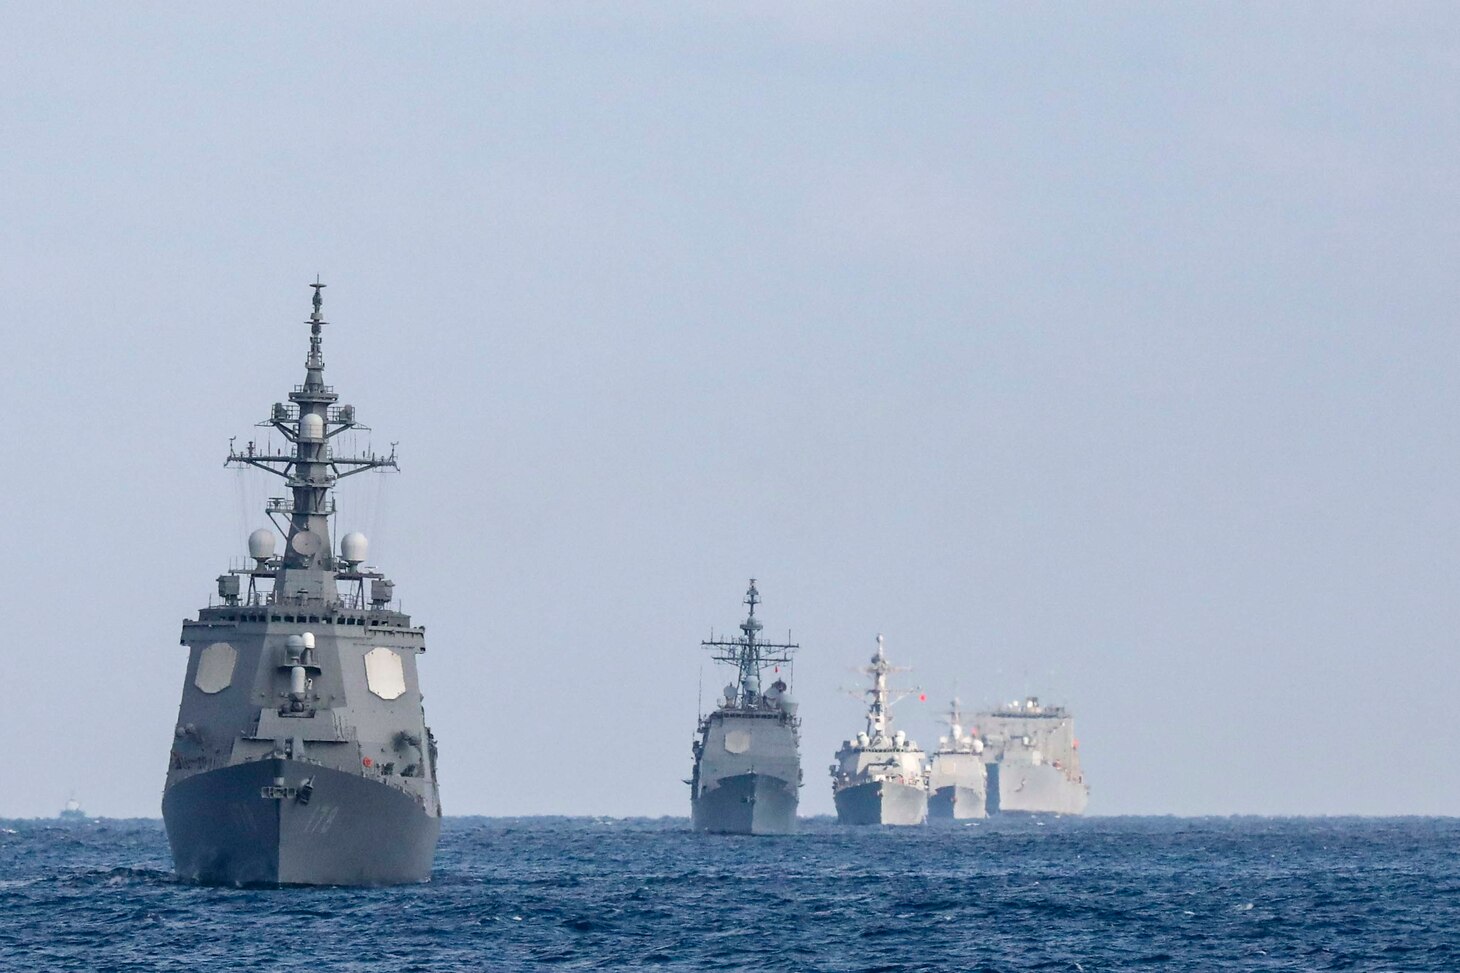 From left to right, the Japan Maritime Self-Defense Force Atago-class guided-missile destroyer JS Ashigara (DDG 178), the Ticonderoga-class guided-missile cruiser USS Shiloh (CG 67), the Arleigh Burke-class guided-missile destroyer USS Rafael Peralta (DDG 115), the Ticonderoga-class guided-missile cruiser USS Antietam (CG 54), the Lewis and Clark-class dry cargo ship USNS Washington Chambers (T-AKE 11) and the Ticonderoga-class guided-missile cruiser USS Chancellorsville (CG 62), not pictured, steam in formation in the Philippine Sea, Jan 20. Chancellorsville is assigned to Commander, Task Force 70/Carrier Strike Group 5 underway preforming routine operations in support of a free and open Indo-Pacific.